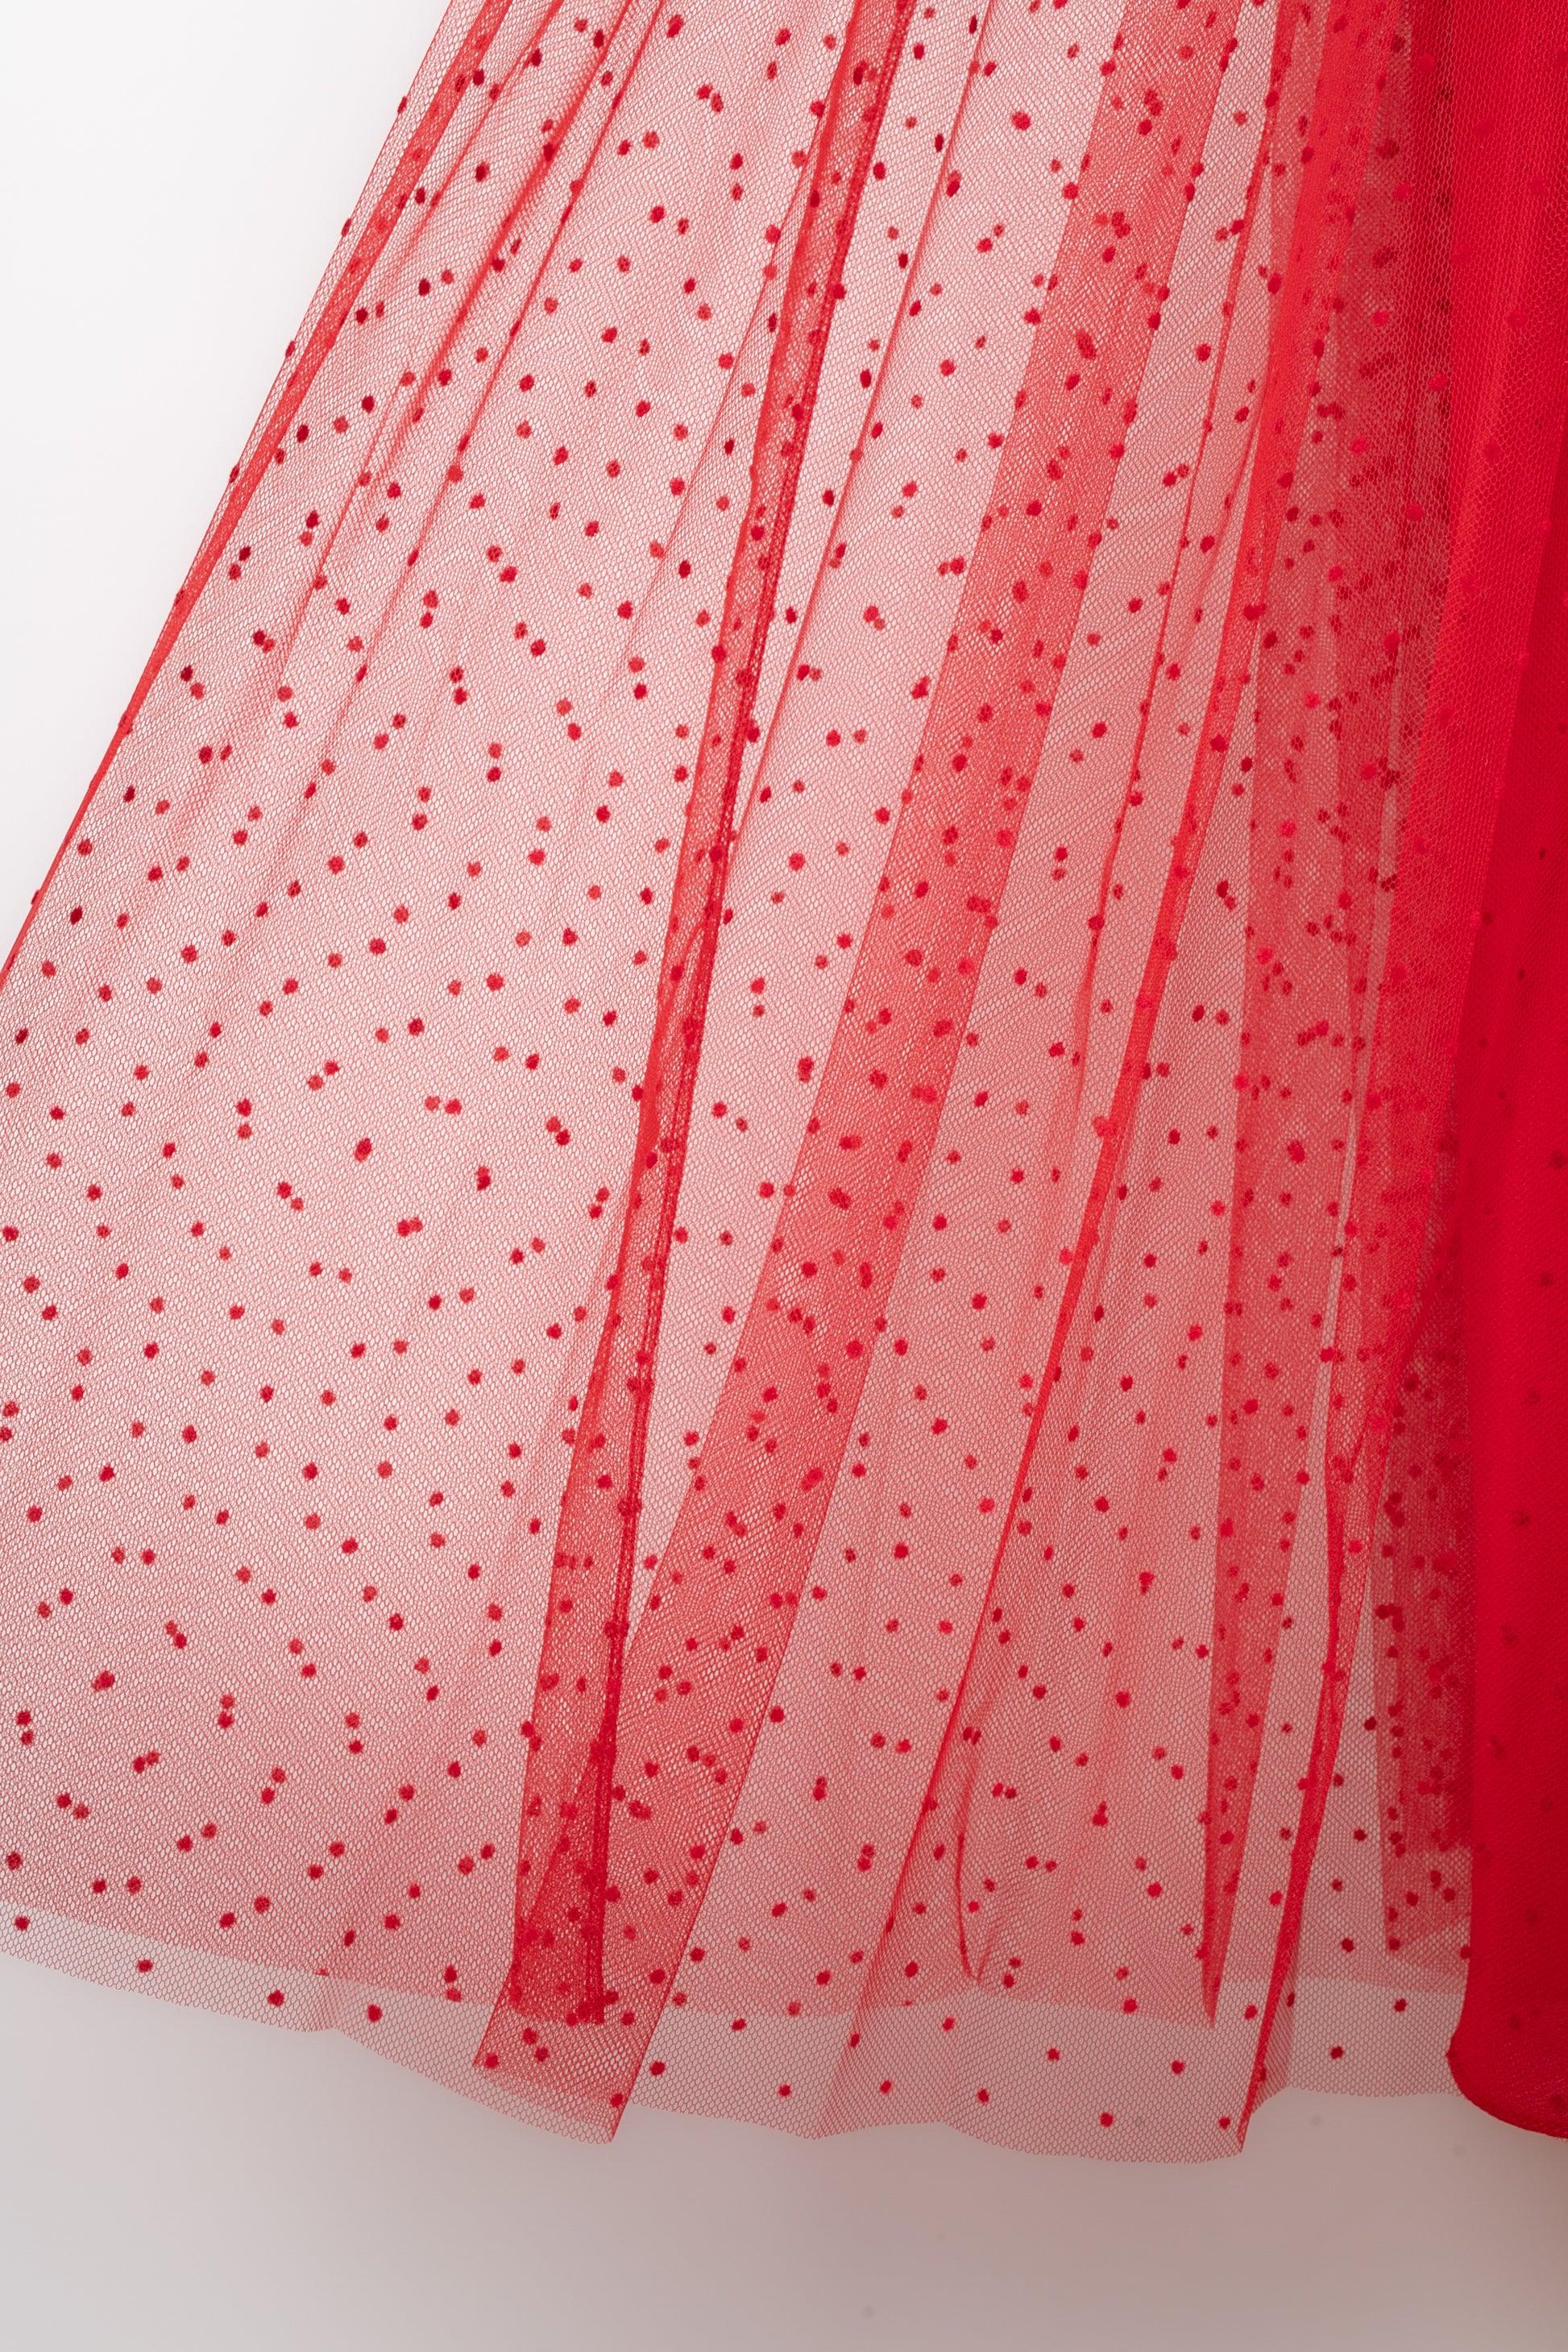 Dior Swiss Dot Long Red Tulle Skirt For Sale 1